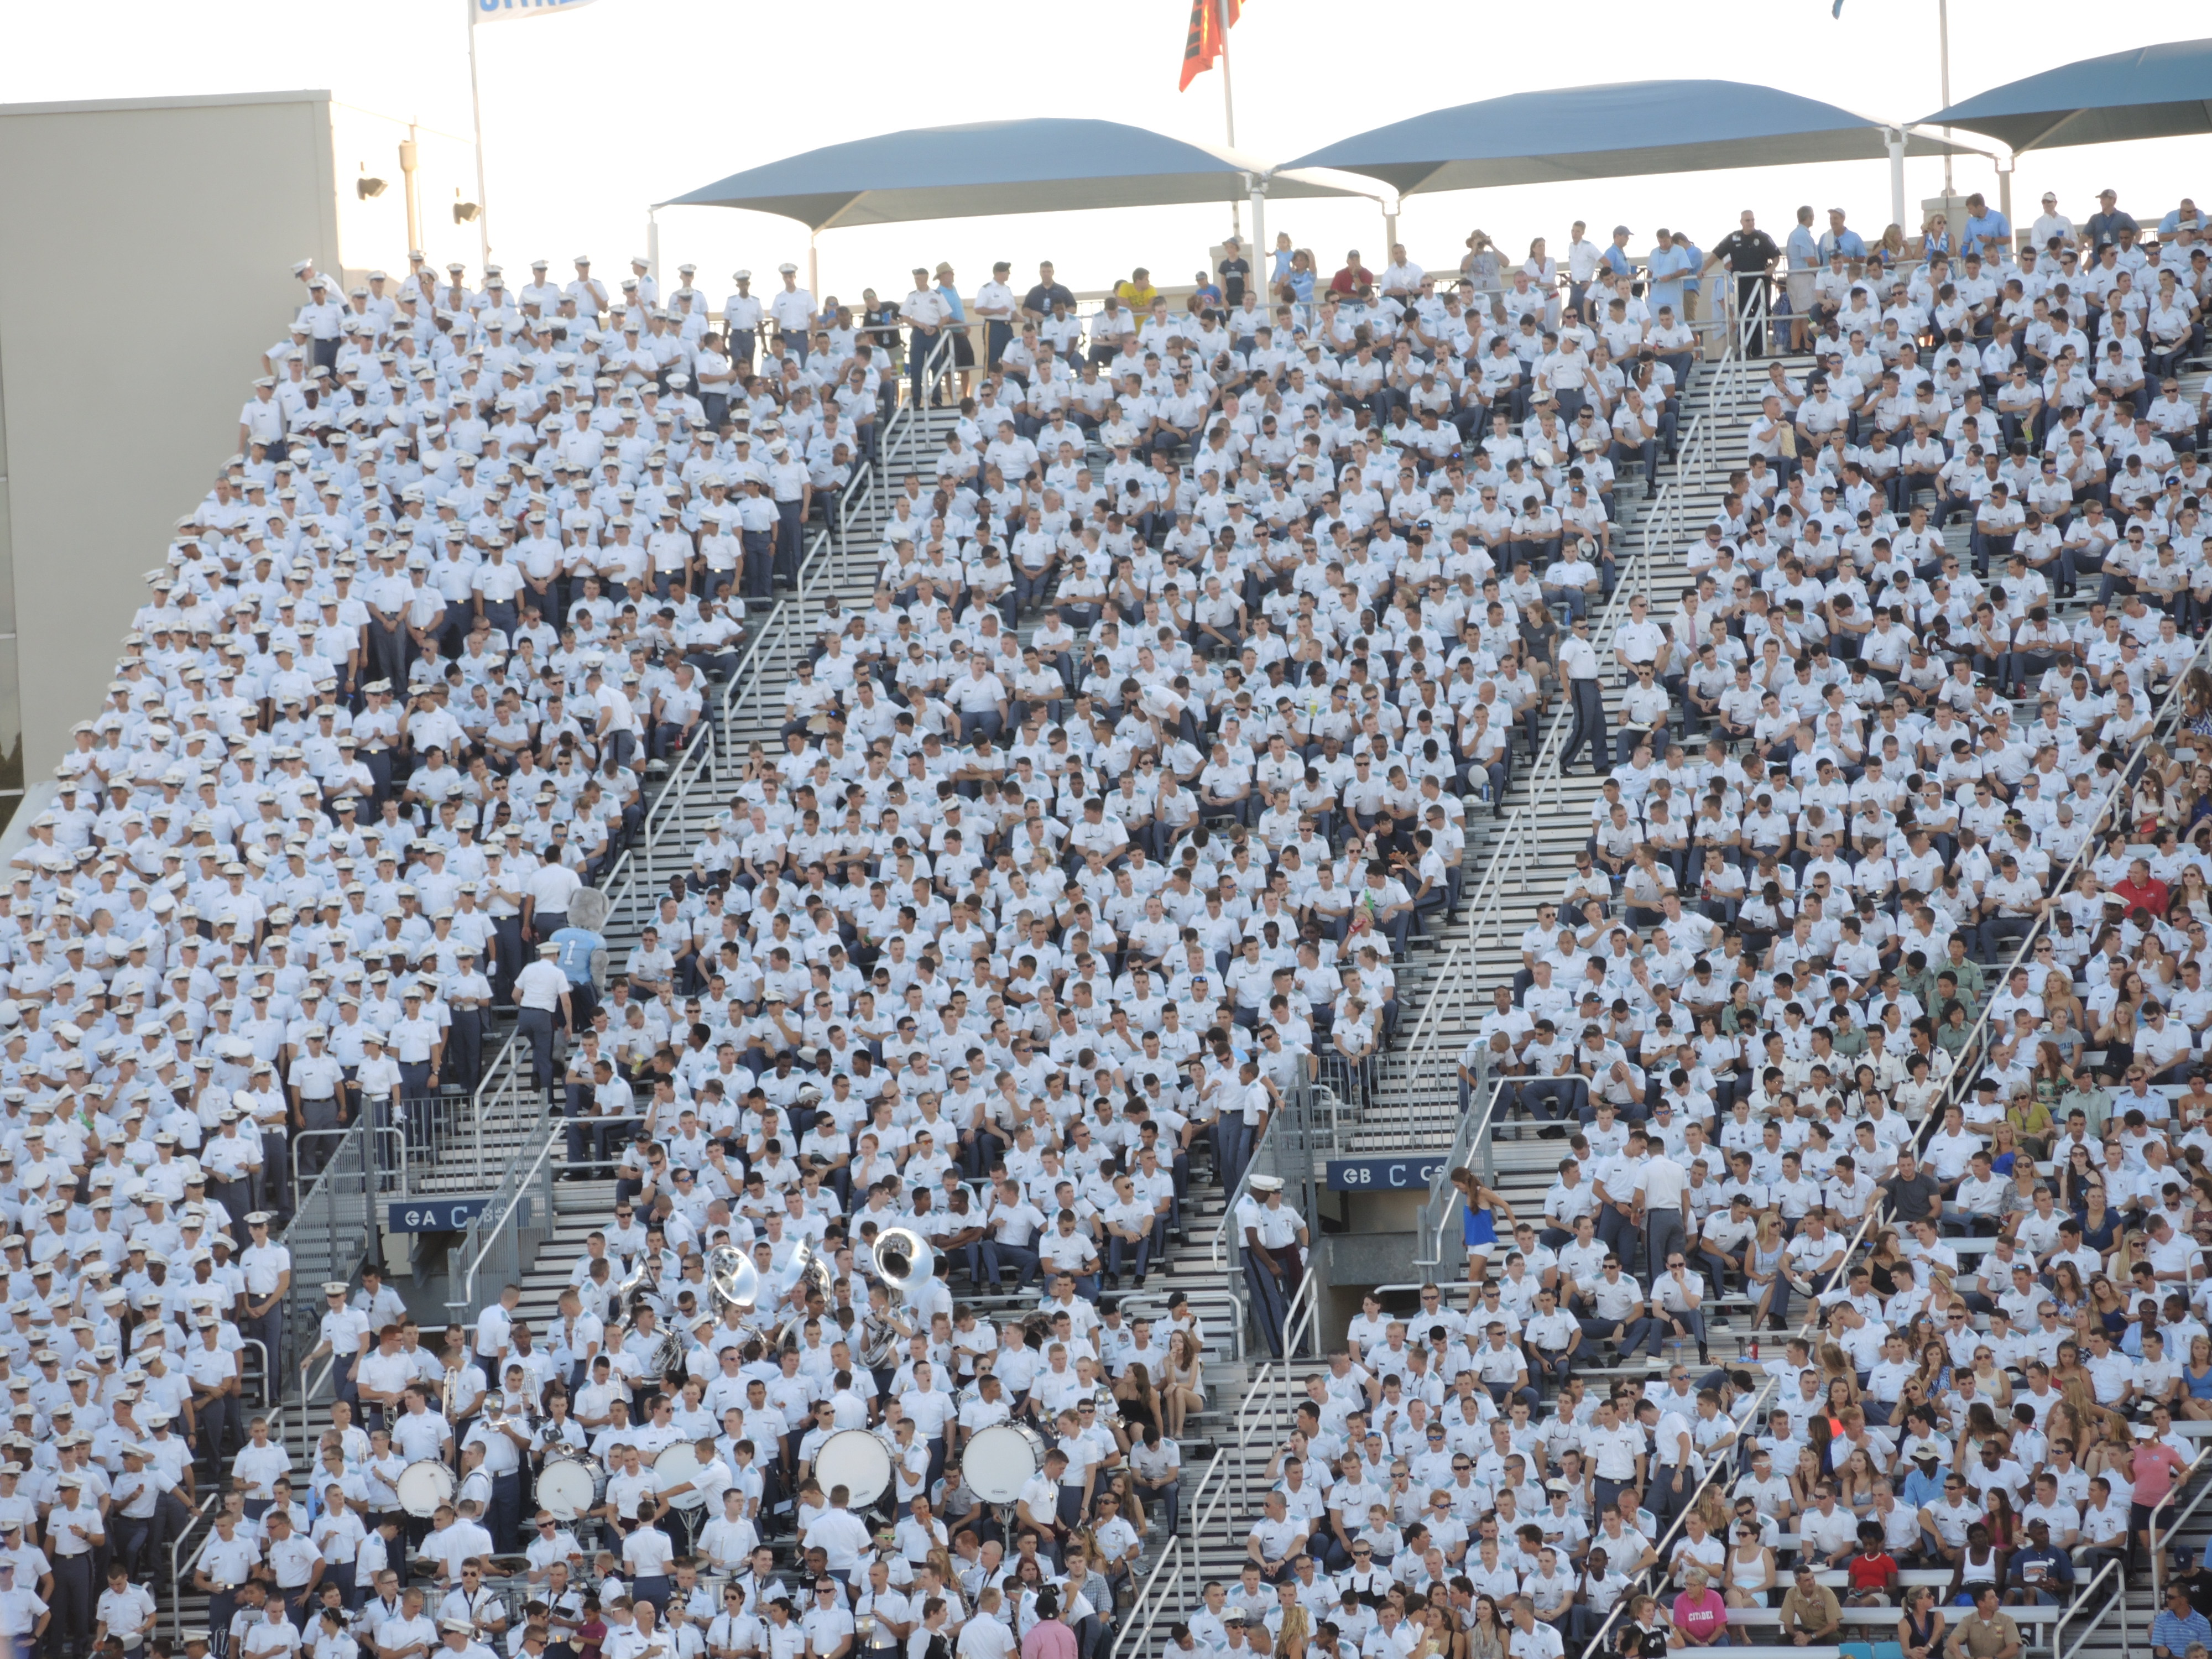 The Cadets filled the three sections last night.